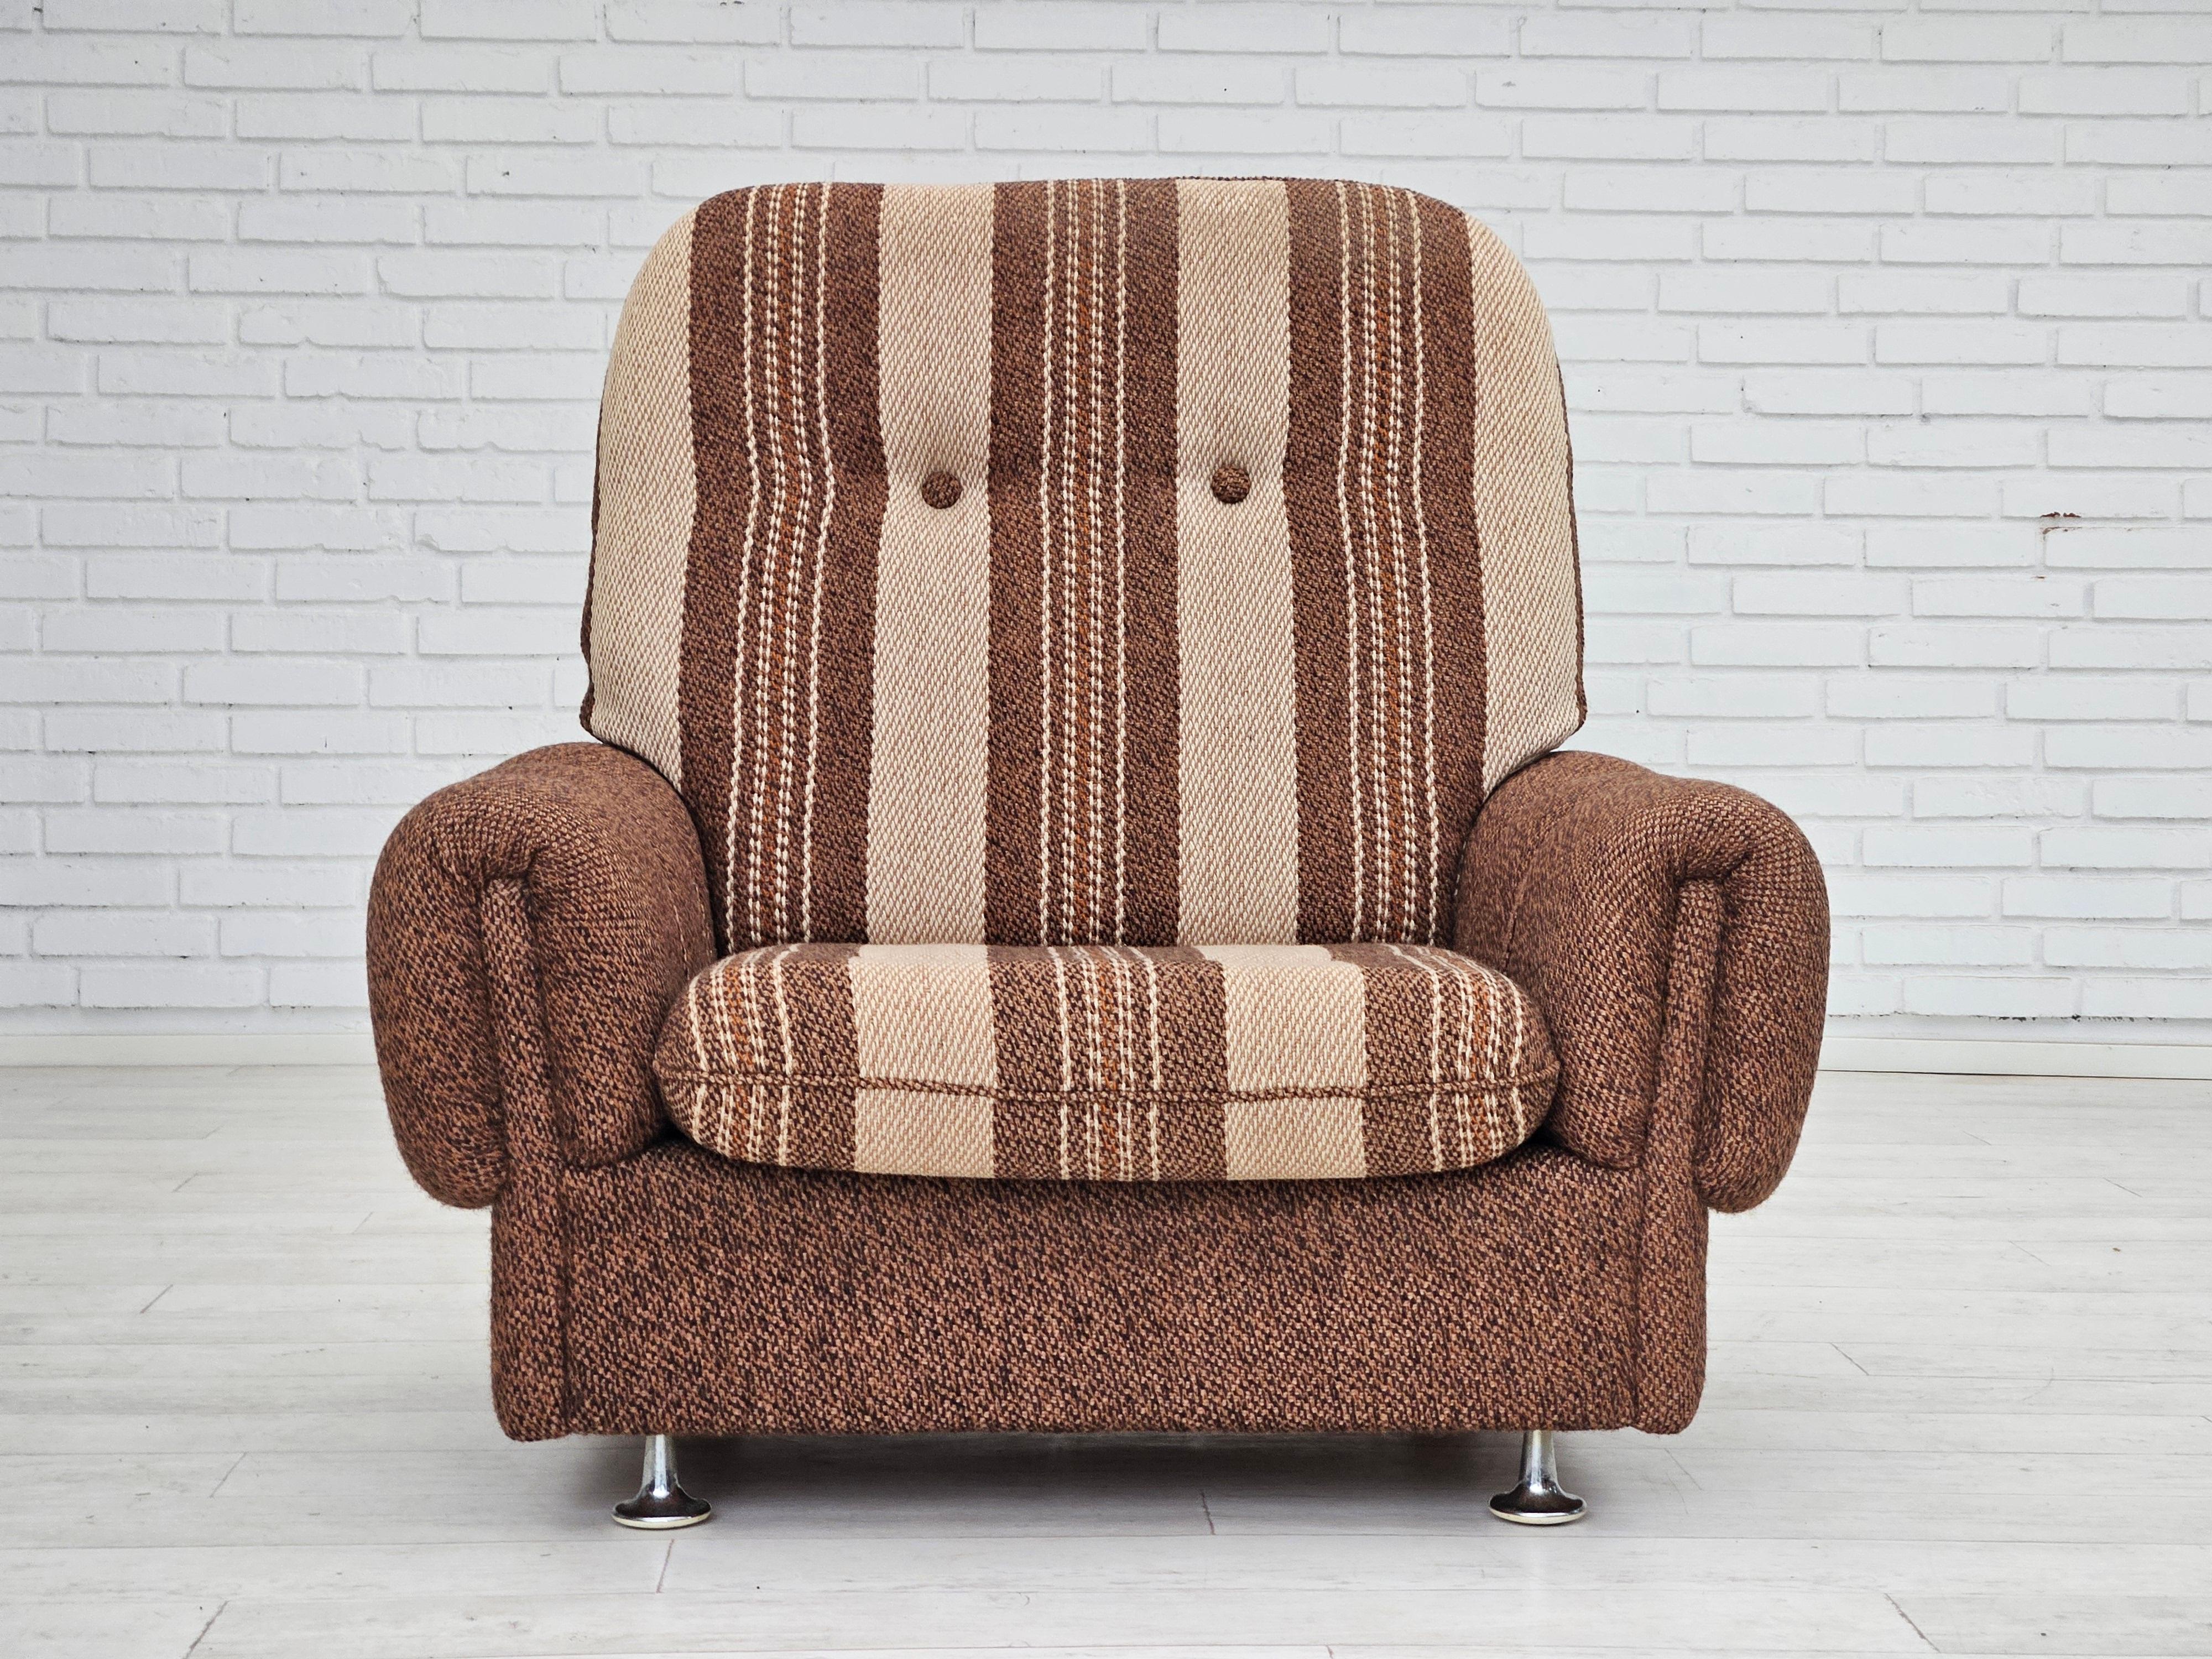 1970s, Danish relax chair in original very good condition: no smells and no stains. Furniture wool in brown and beige colors. Removable seat cushion, chrome wheels, and legs. Manufactured by Danish furniture manufacturer in about 1970s.